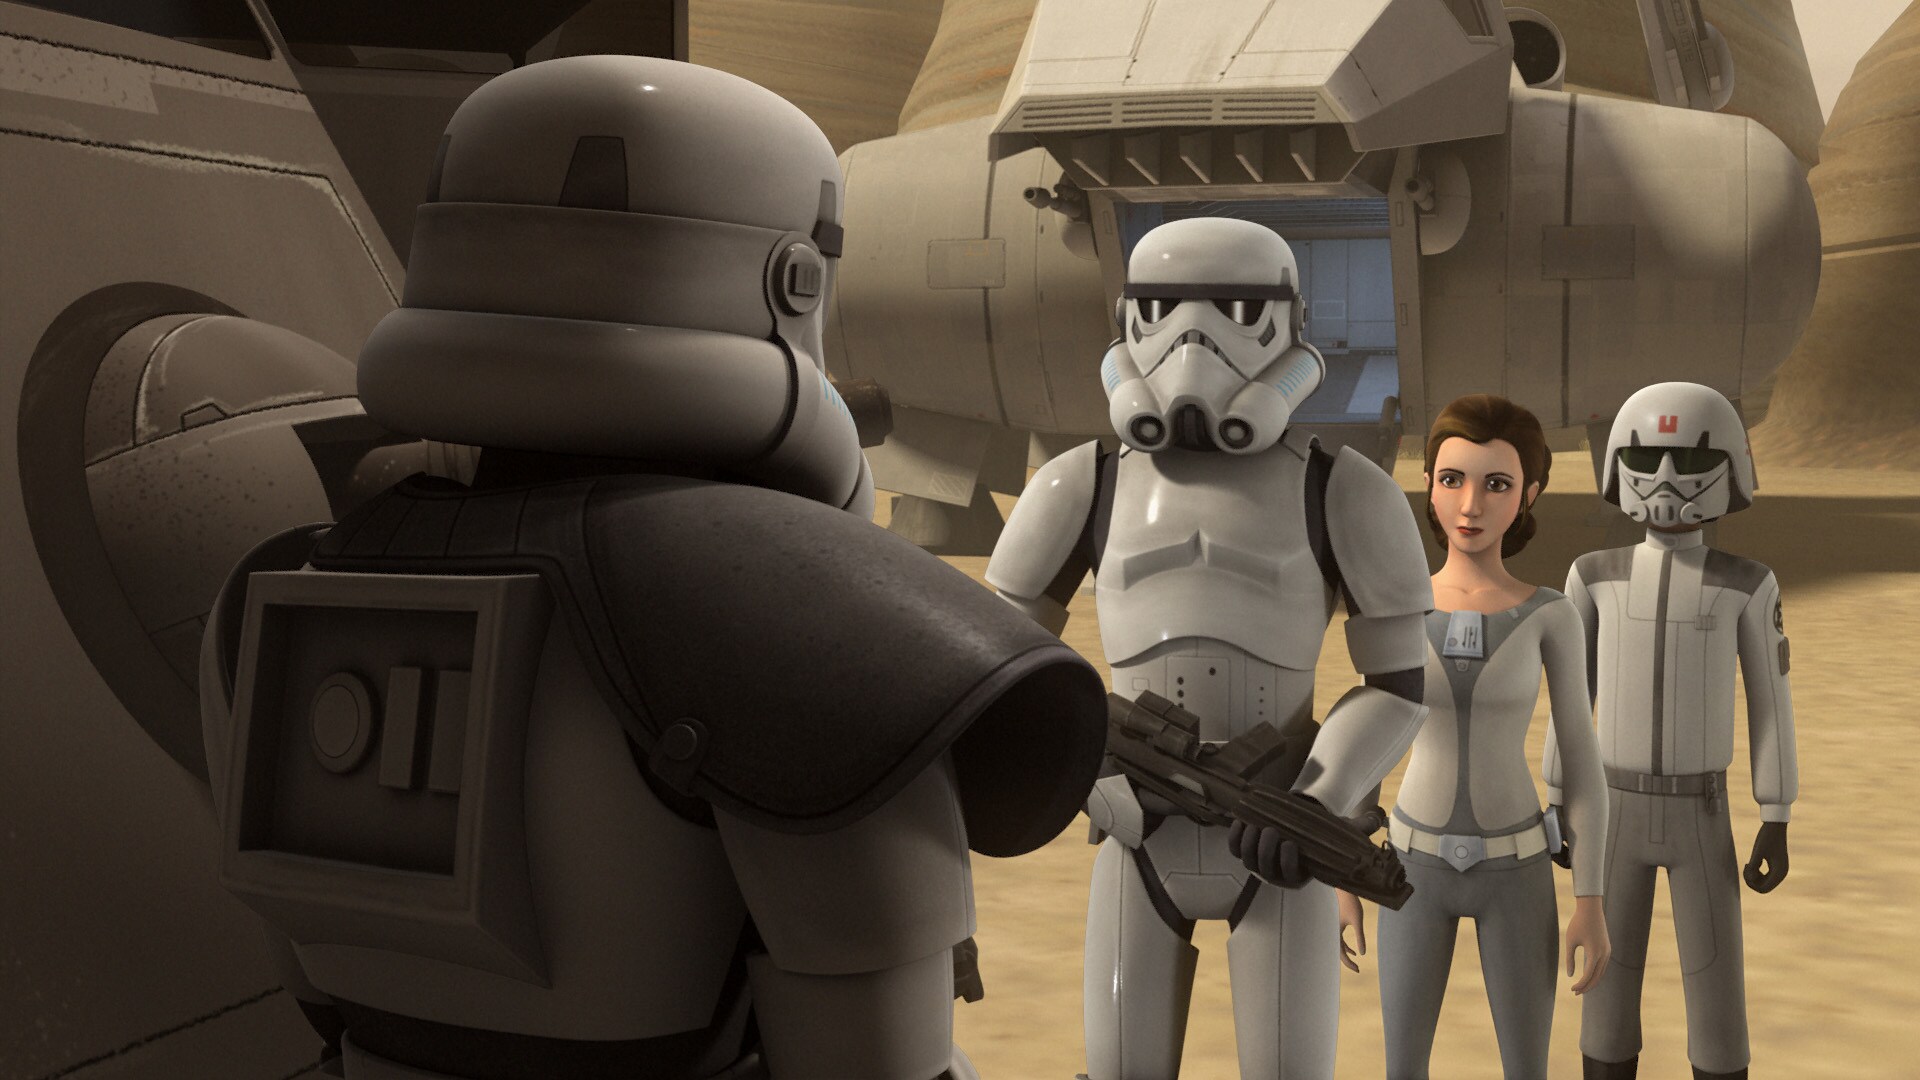 The trio lands, but a security checkpoint stops them. The stormtroopers have Azadi in custody wit...